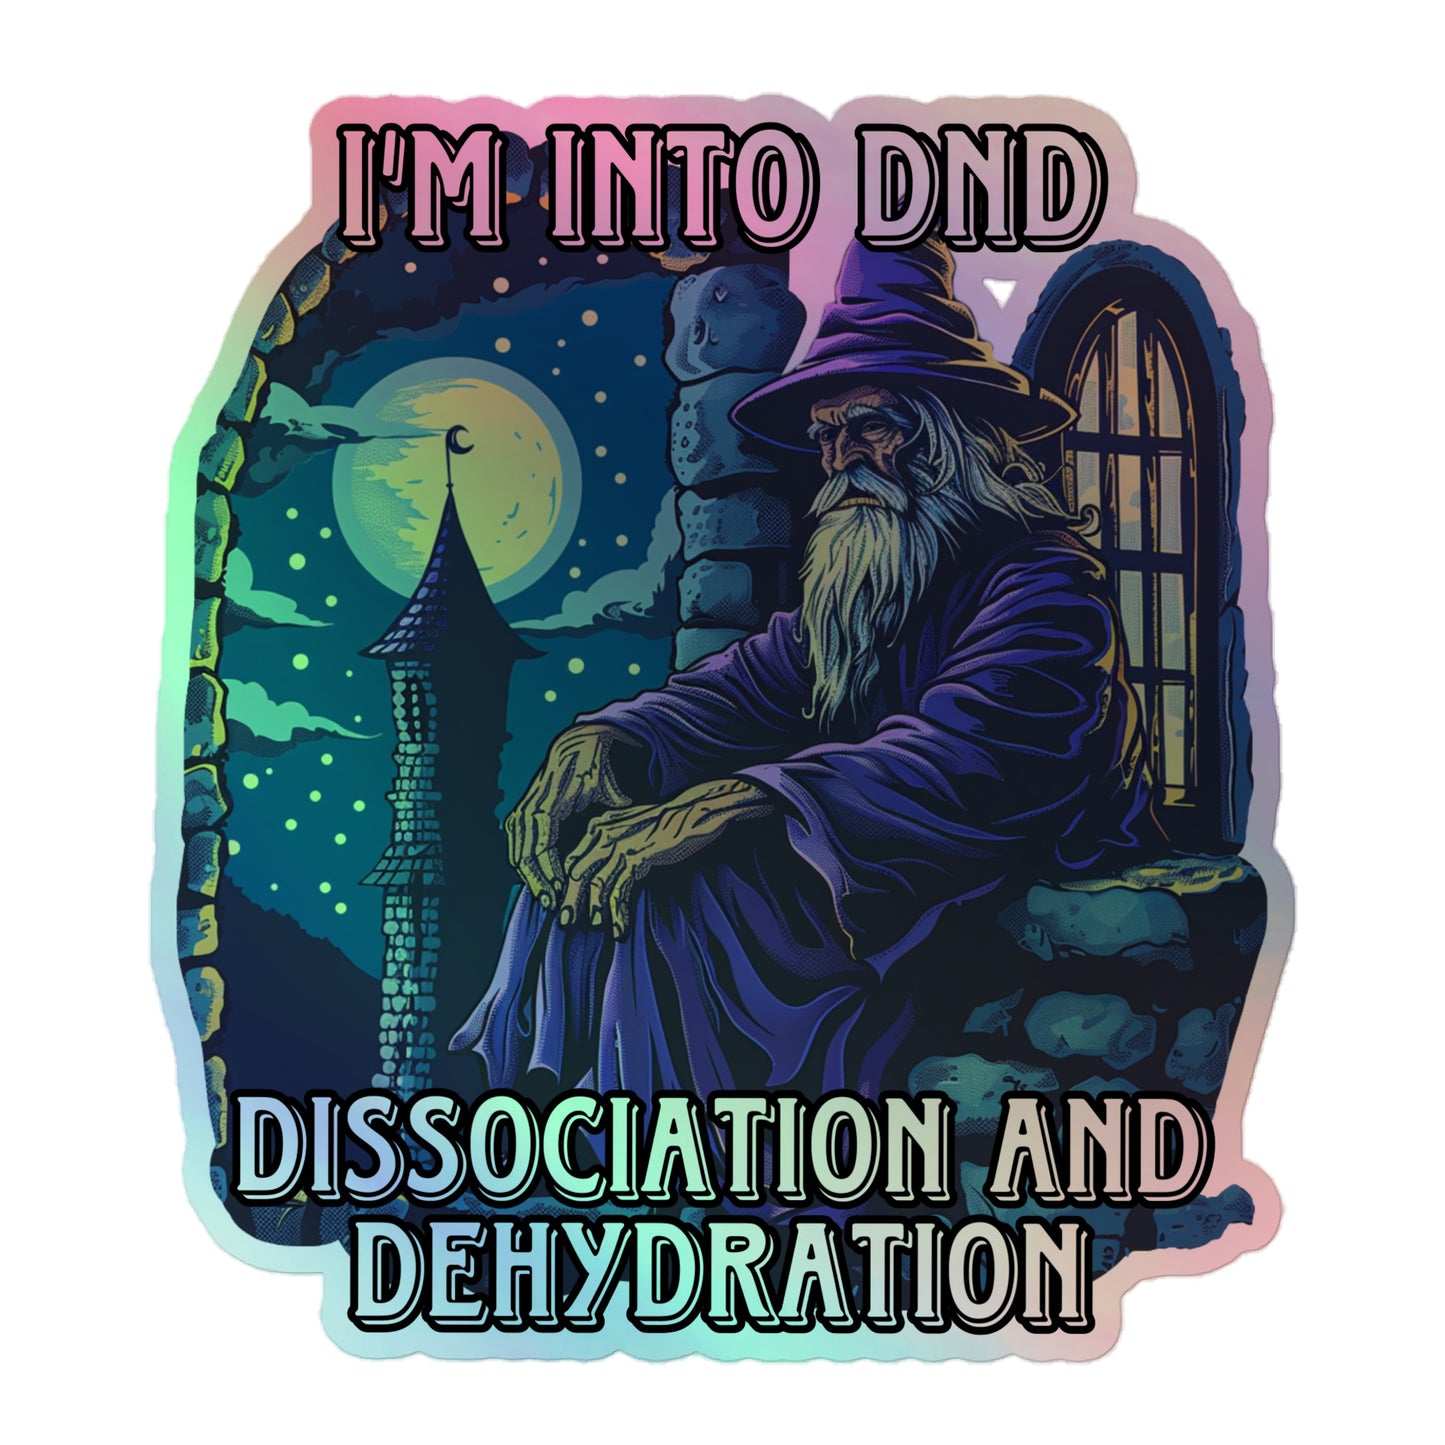 I’m into dnd dissociation and dehydration Holograpic sticker